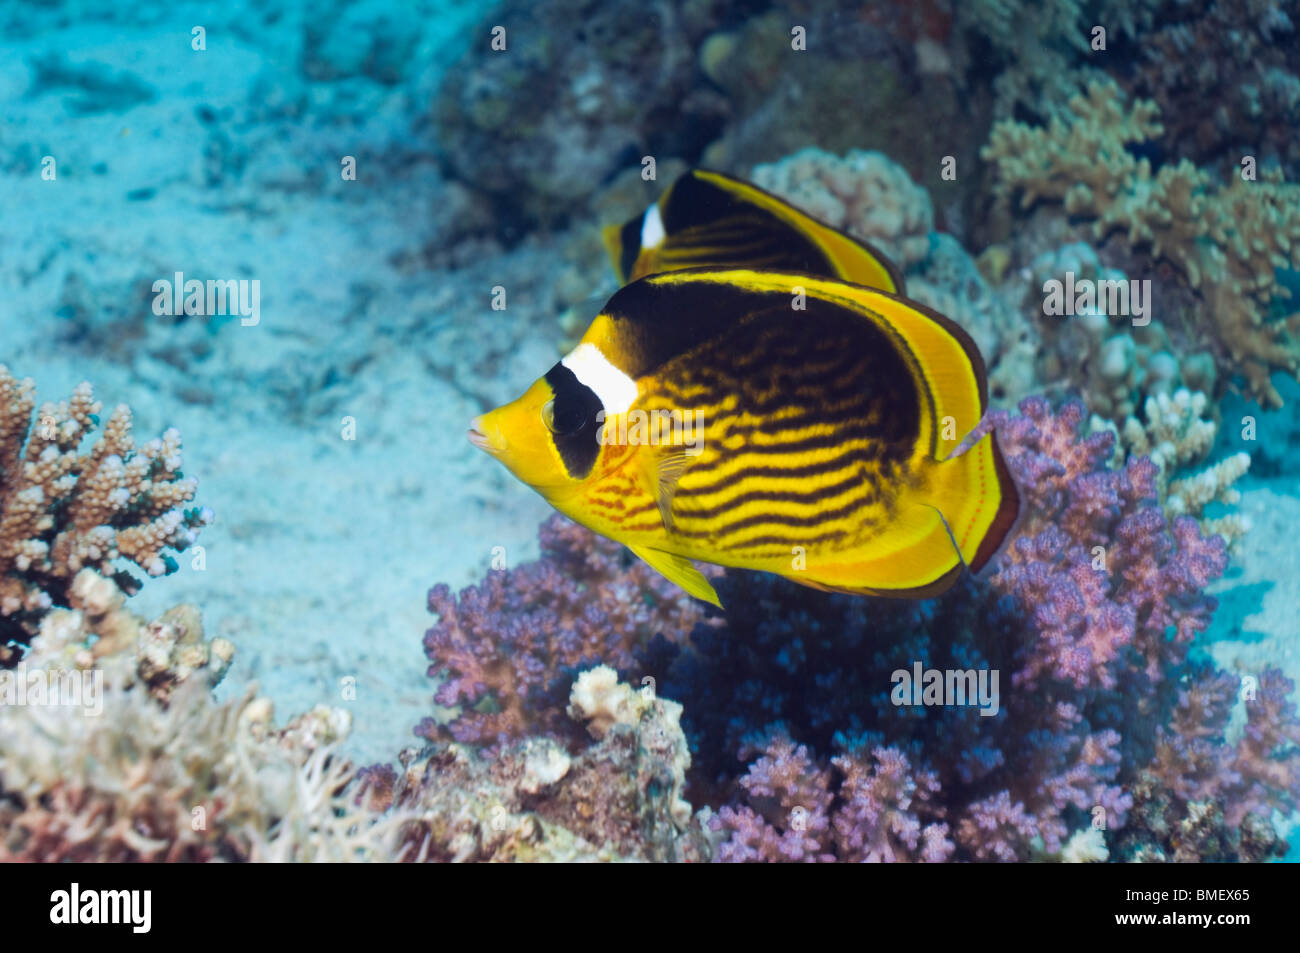 Red Sea racoon butterflyfish on coral reef.  Egypt, Red Sea. Stock Photo